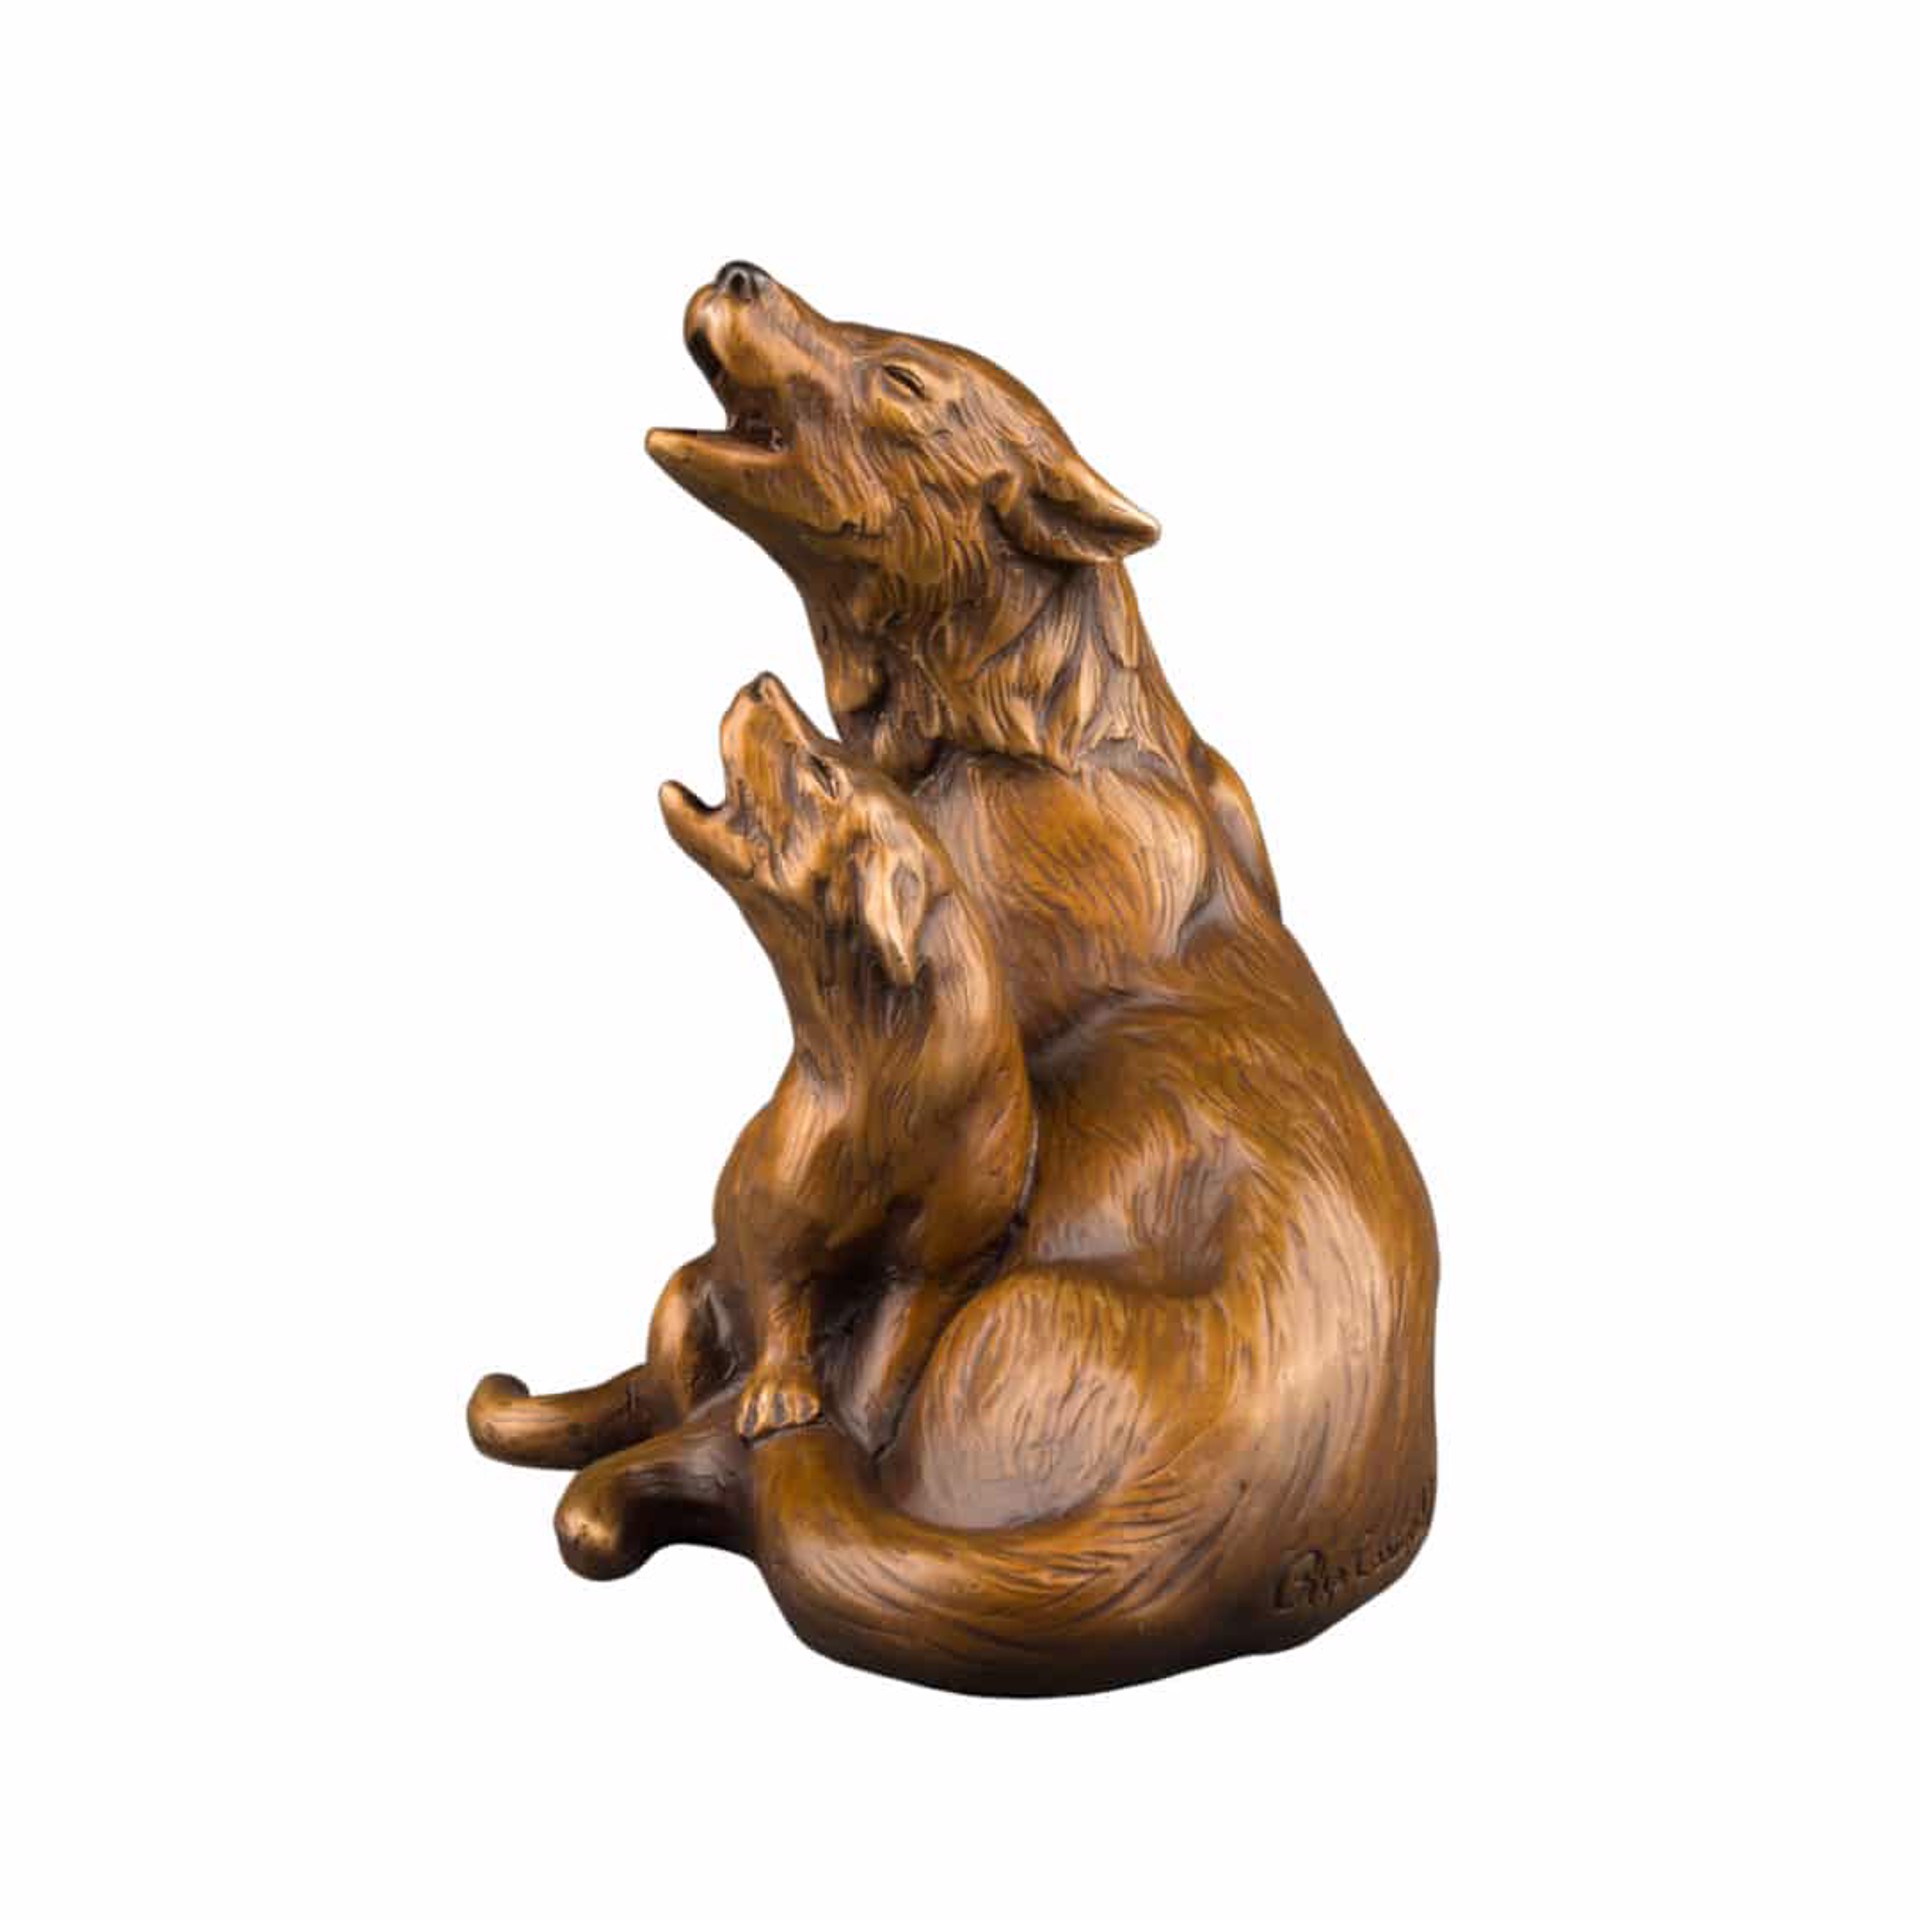 Wolf and Pup Howling Original Bronze Sculpture by Rip and Alison Caswell, Contemporary Fine Art, Modern Wildlife Art, Available At Gallery Wild